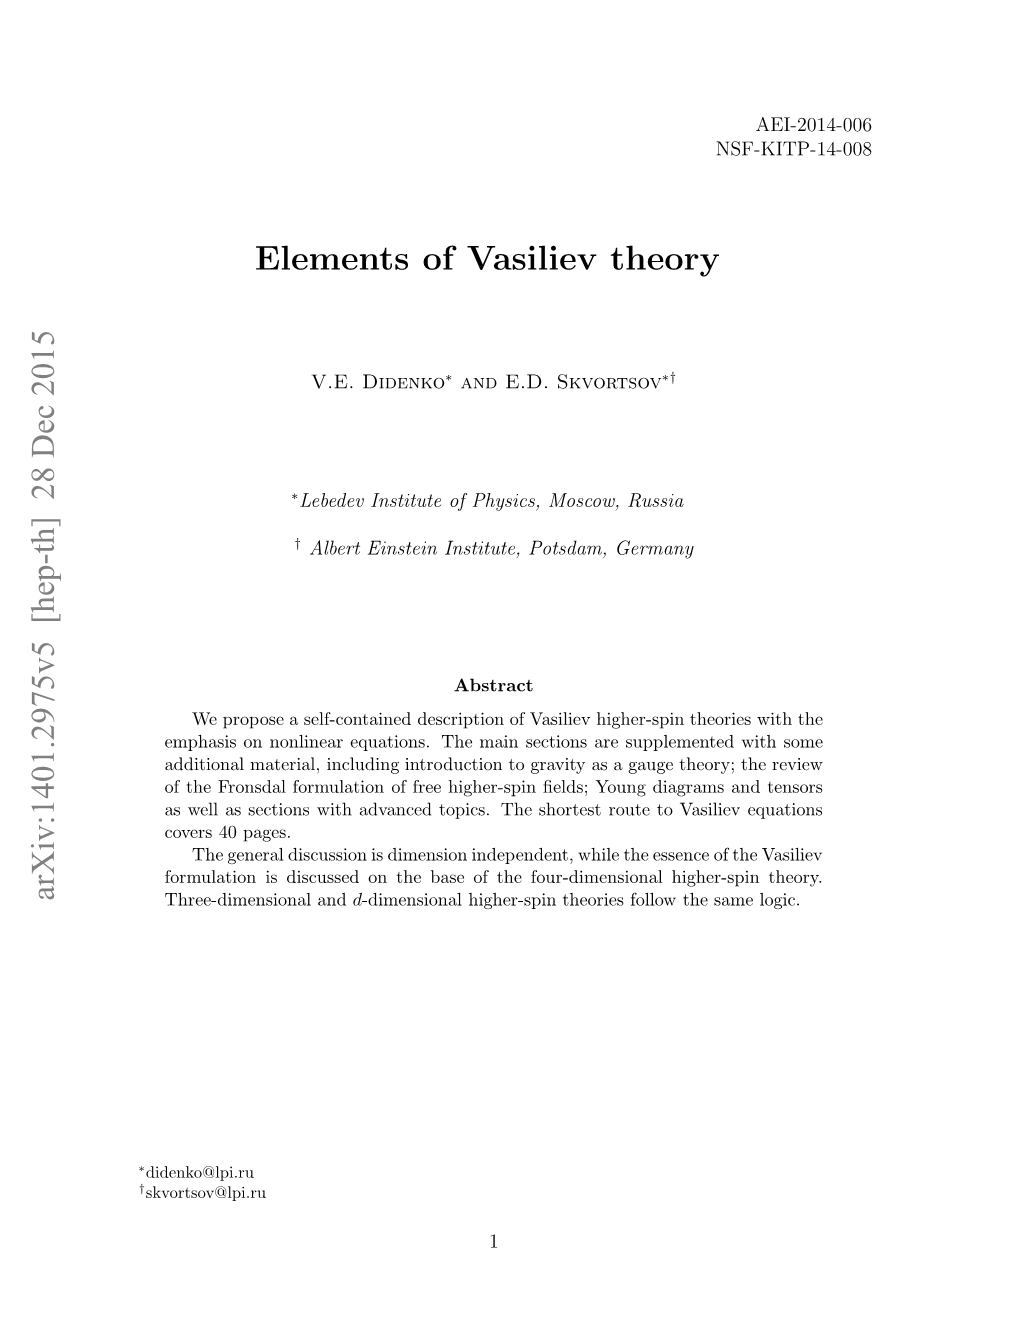 Elements of Vasiliev Theory